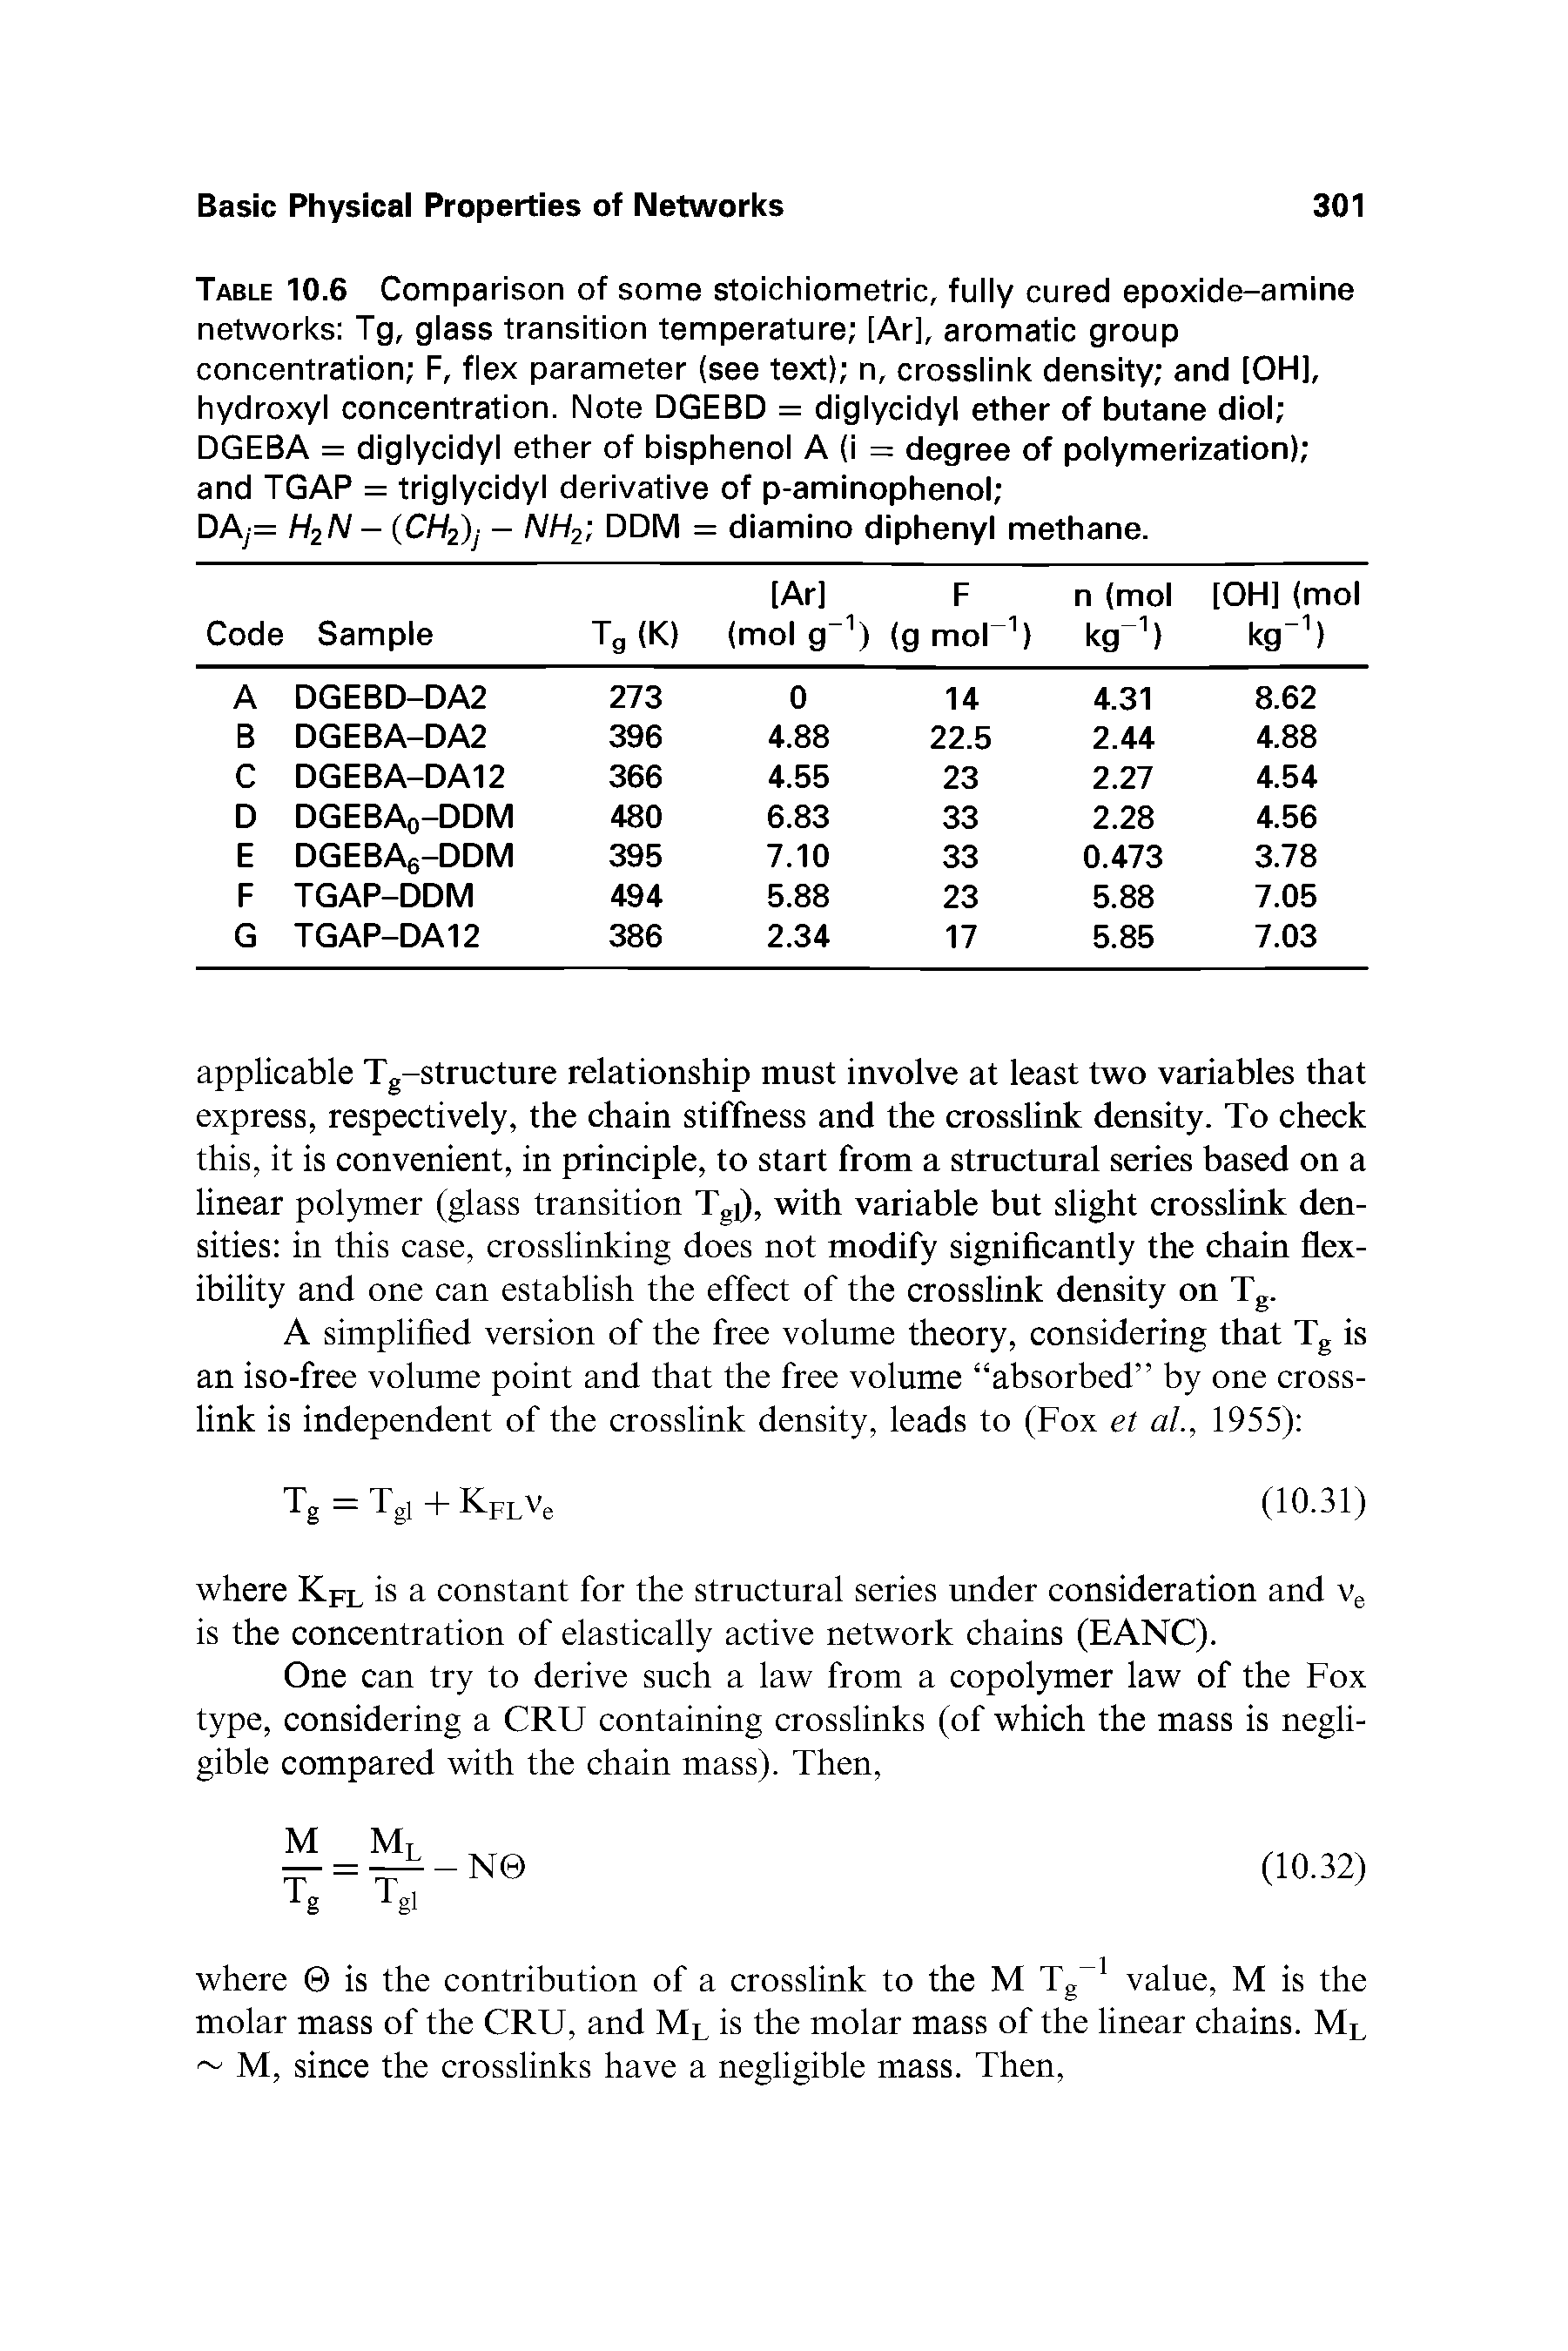 Table 10.6 Comparison of some stoichiometric, fully cured epoxide-amine networks Tg, glass transition temperature [Ar], aromatic group concentration F, flex parameter (see text) n, crosslink density and [OH], hydroxyl concentration. Note DGEBD = diglycidyl ether of butane diol DGEBA = diglycidyl ether of bisphenol A (i = degree of polymerization) and TGAP = triglycidyl derivative of p-aminophenol ...